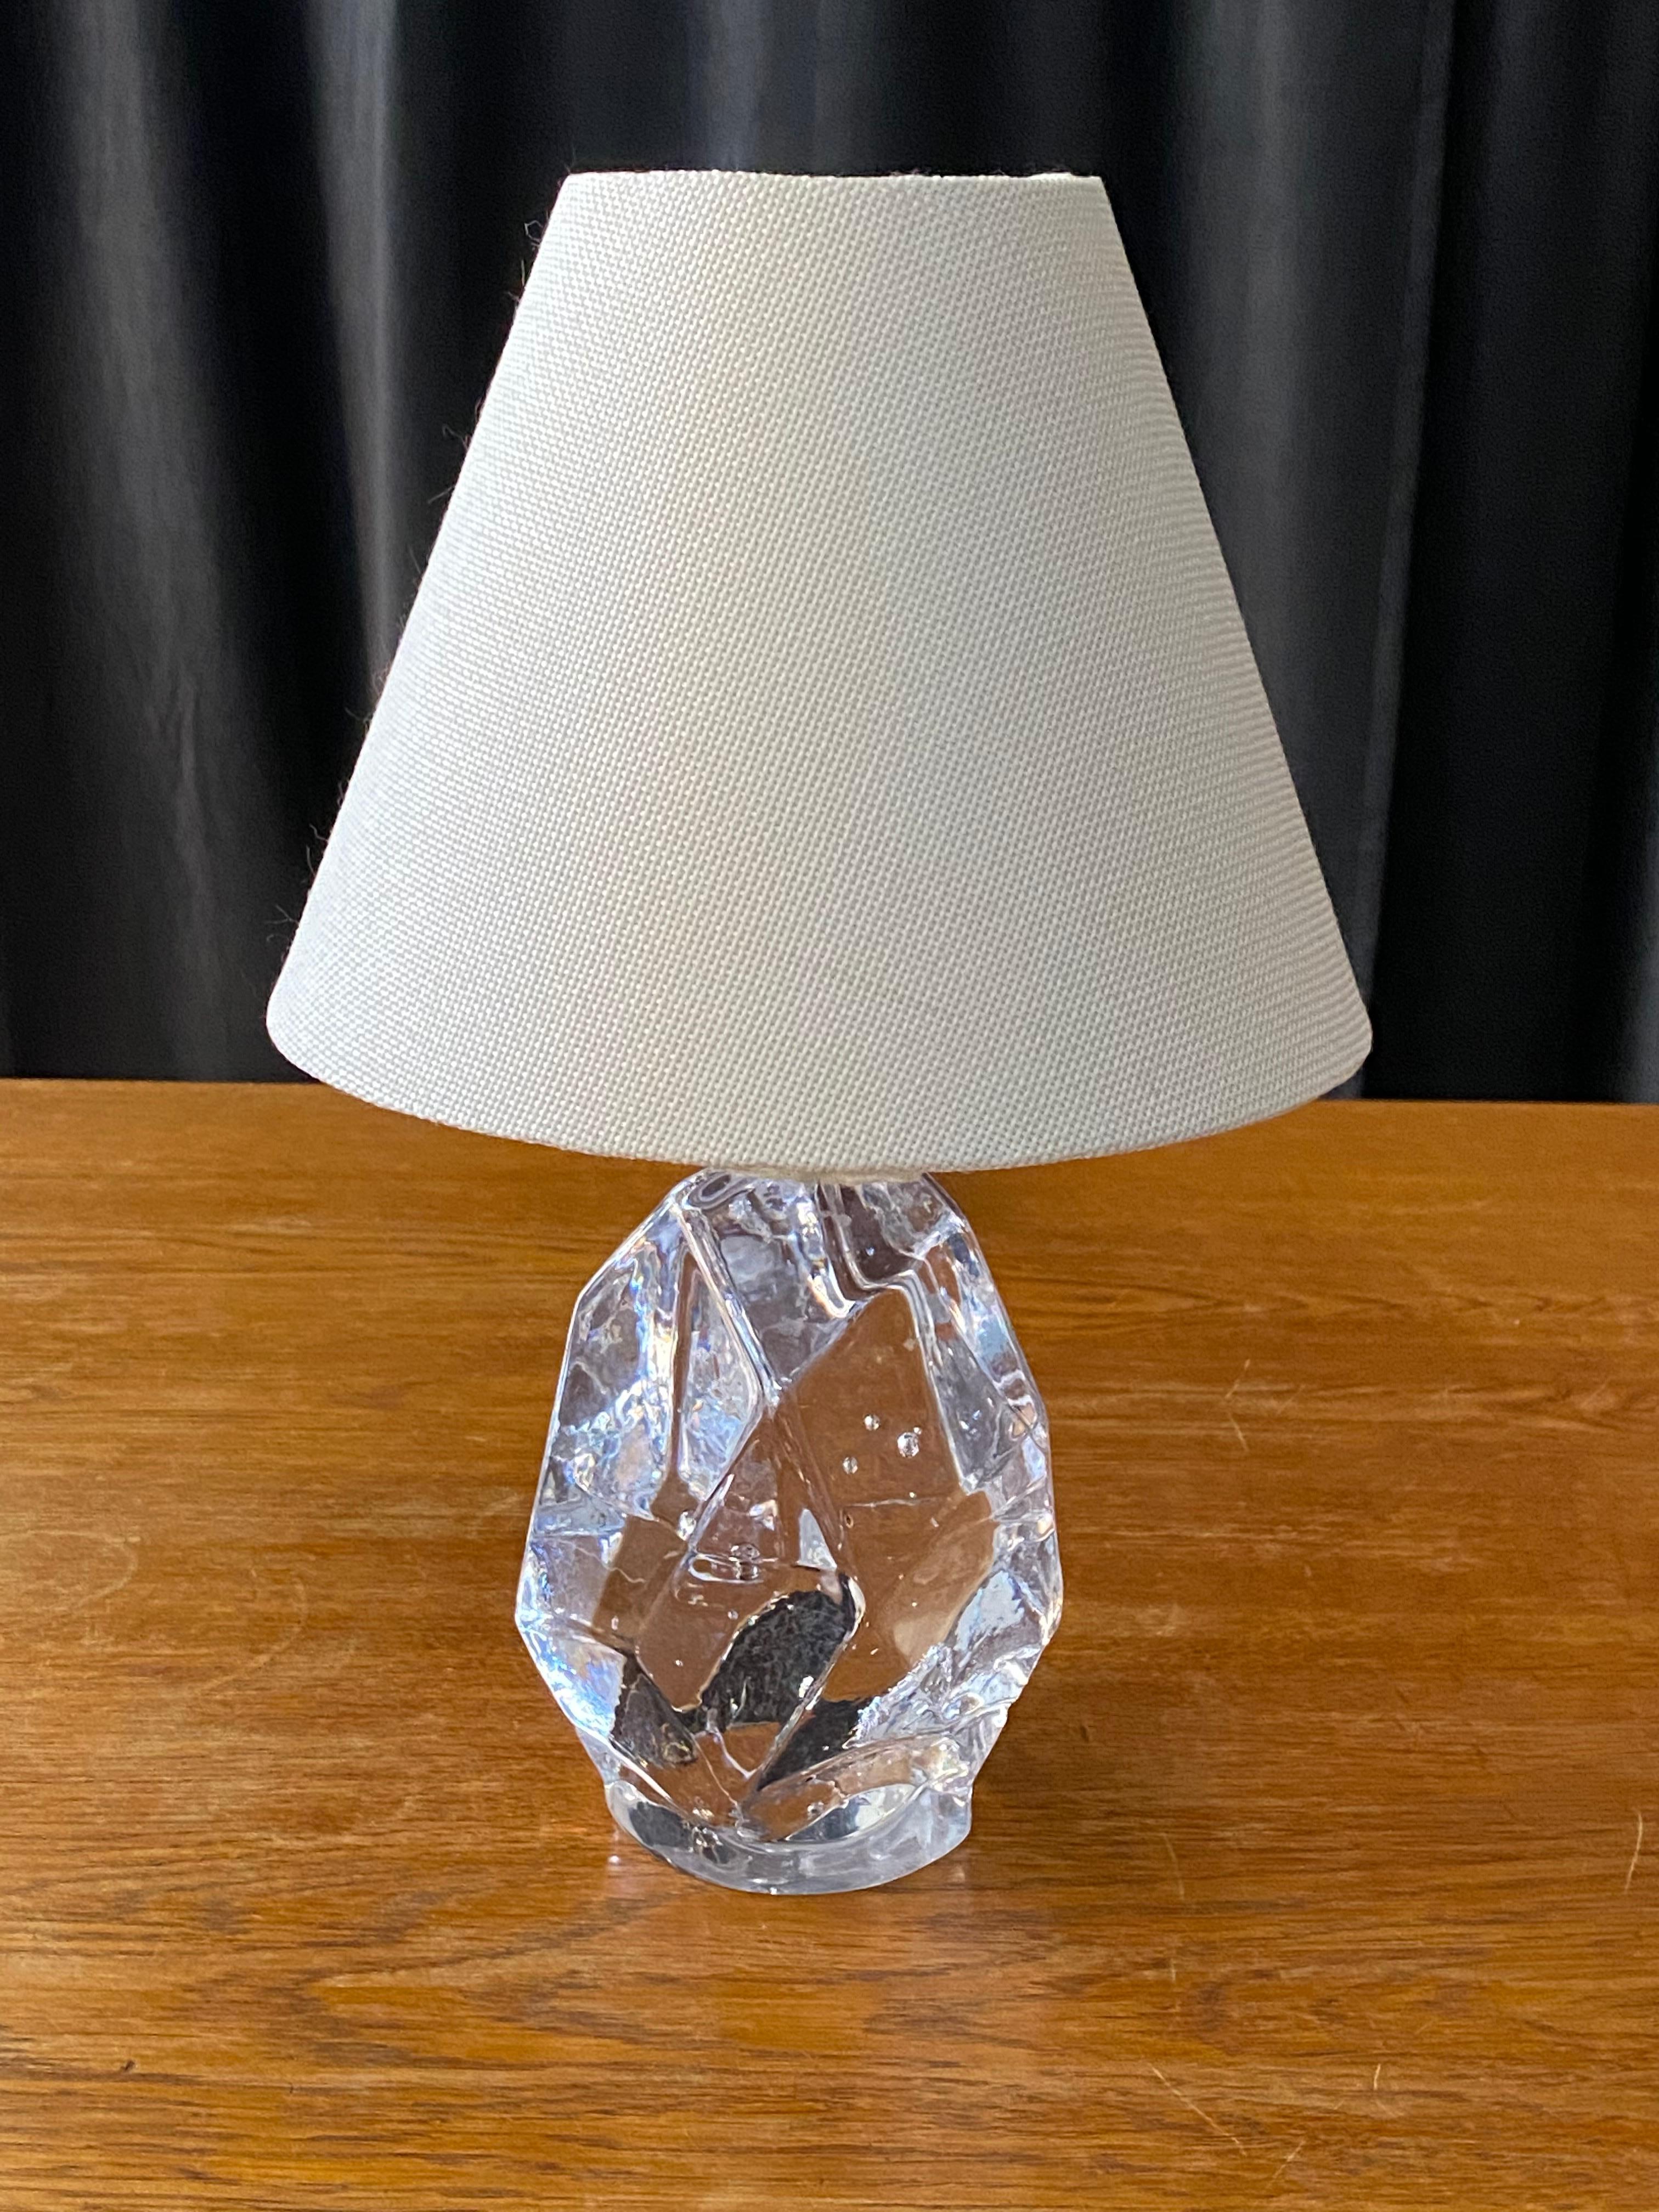 A highly modernist organic table lamp. Of Swedish production, produced by Reijmyre Glasbruk, signed. In a form similar to that of freeform works by Jean Michel Frank and Max Ingrand. 

Dimensions are of lamp with lampshade in the current illustrated